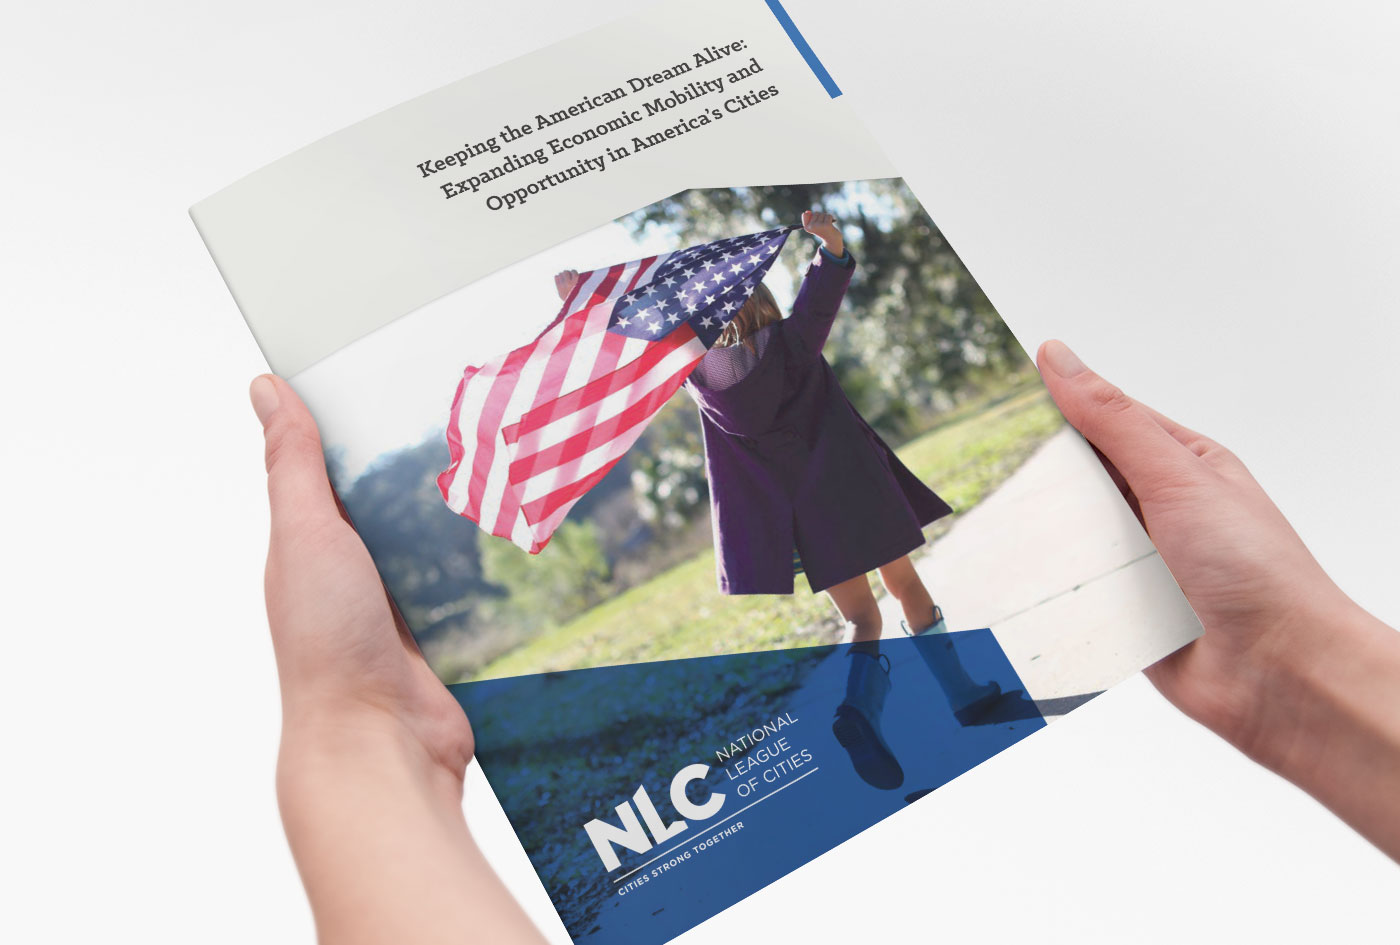 National League of Cities: Keeping the American Dream Alive